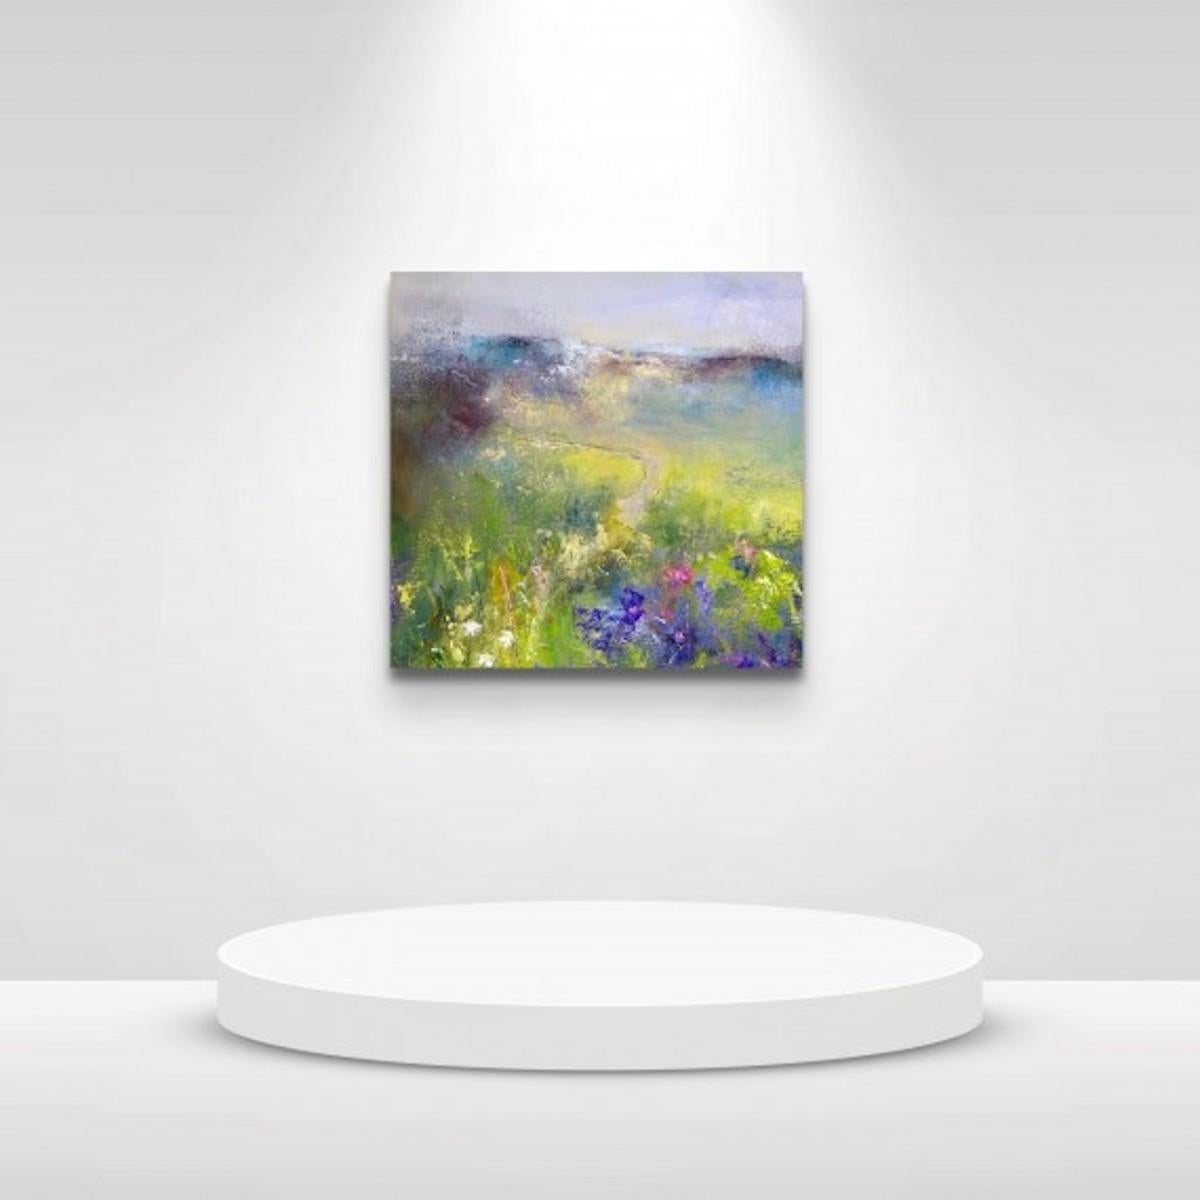 Bright Field [2020]

limited_edition
Limited Edition Giclee Fine Art Print
Edition number 125
Image size: H:40 cm x W:40 cm
Complete Size of Unframed Work: H:45 cm x W:45 cm x D:0.1cm
Sold Unframed
Please note that insitu images are purely an